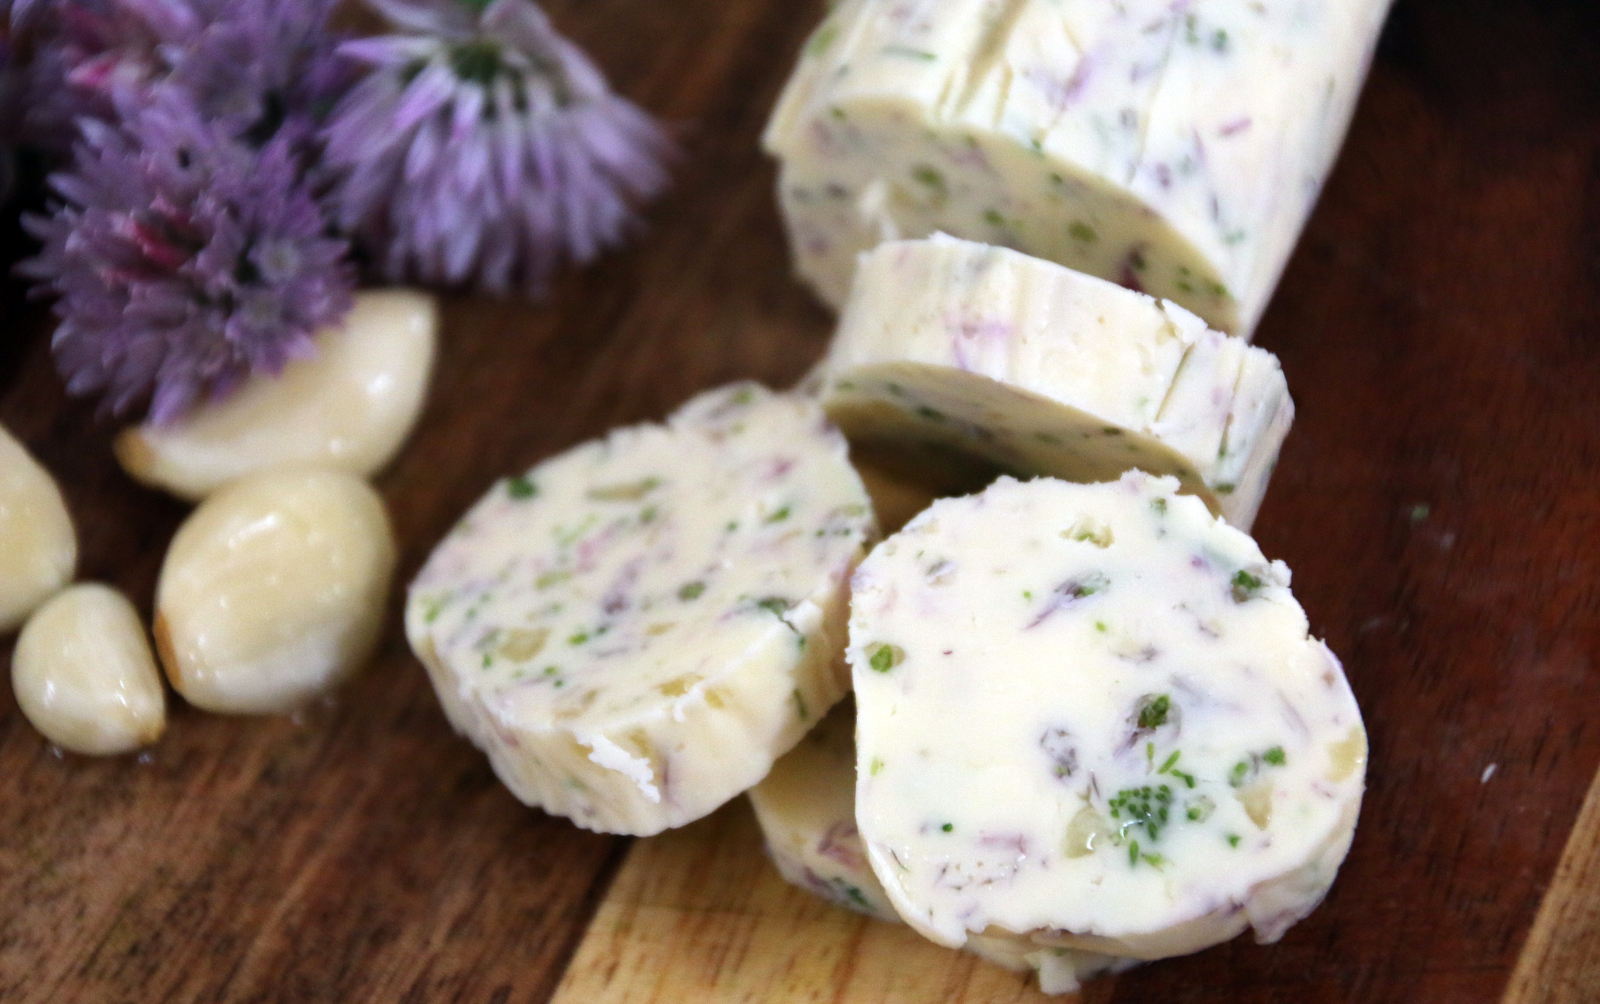 Vegan and gluten-free Garlicky Chive Blossom Butter